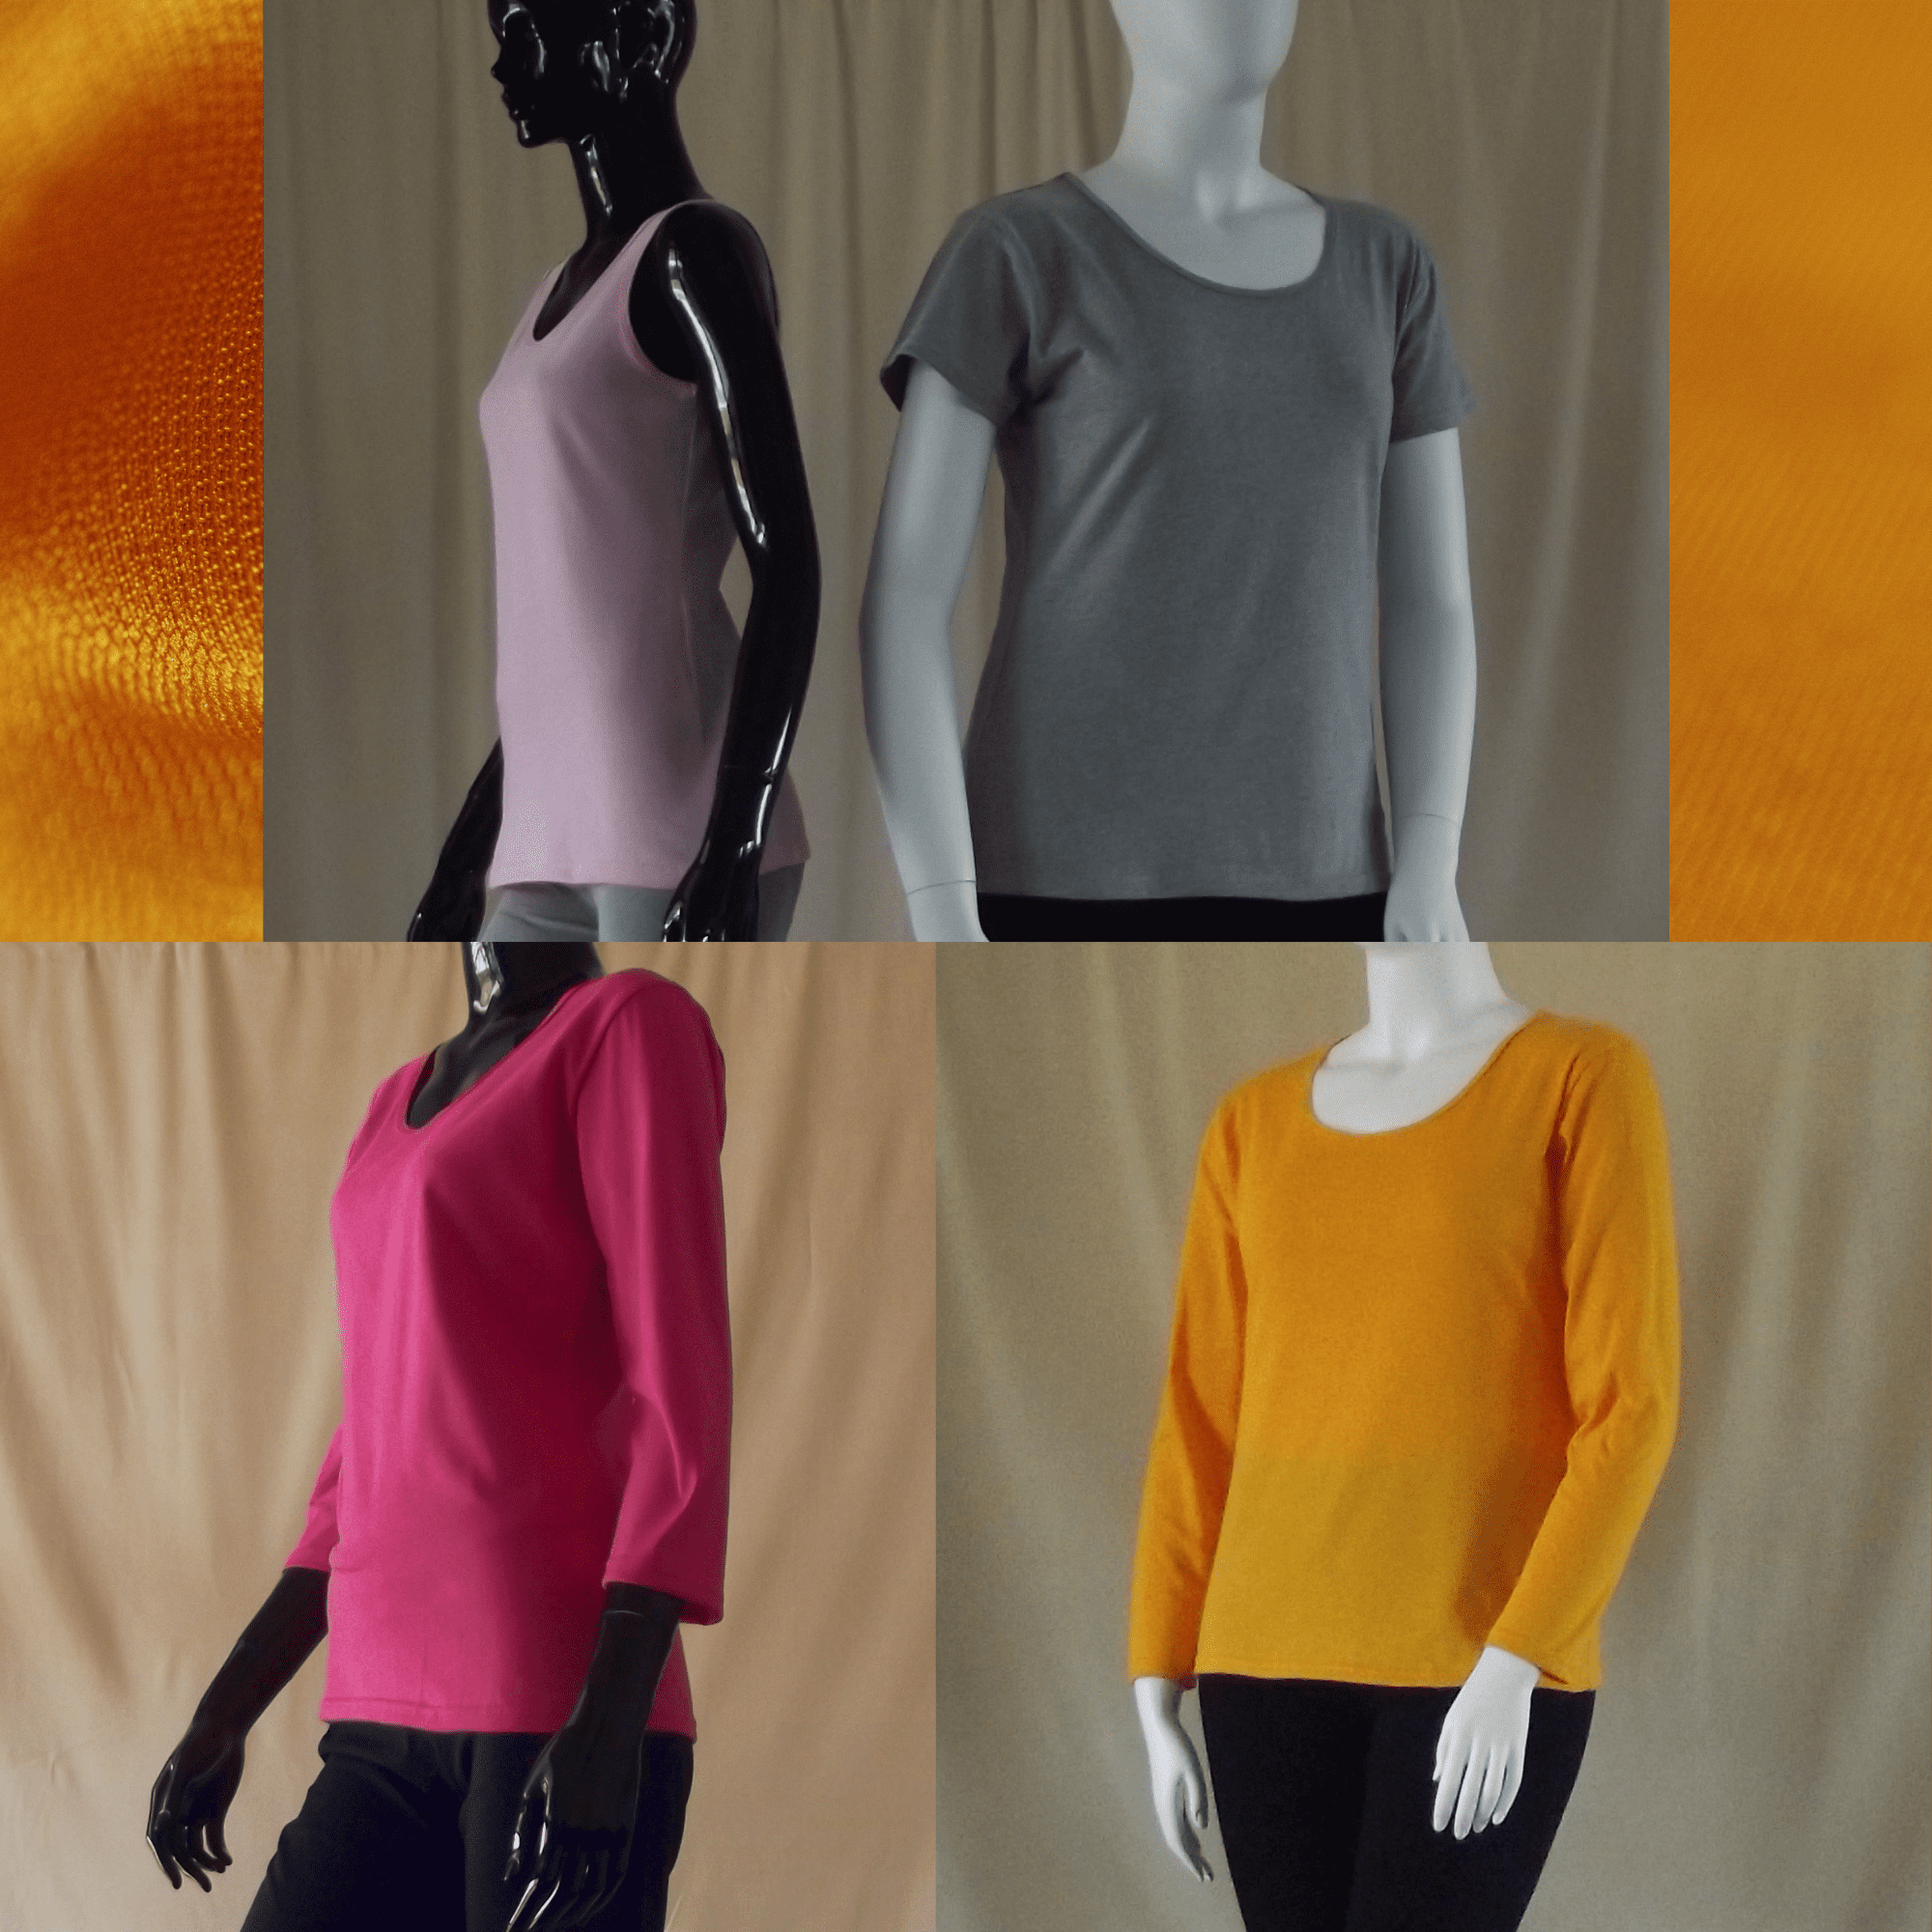 a picture of a baby pink womens cotton singlet, a grey marle womens short sleeve t-shirt, a hot pink womens 3/4 sleeve cotton t-shirt and a yellow long sleeve womens top